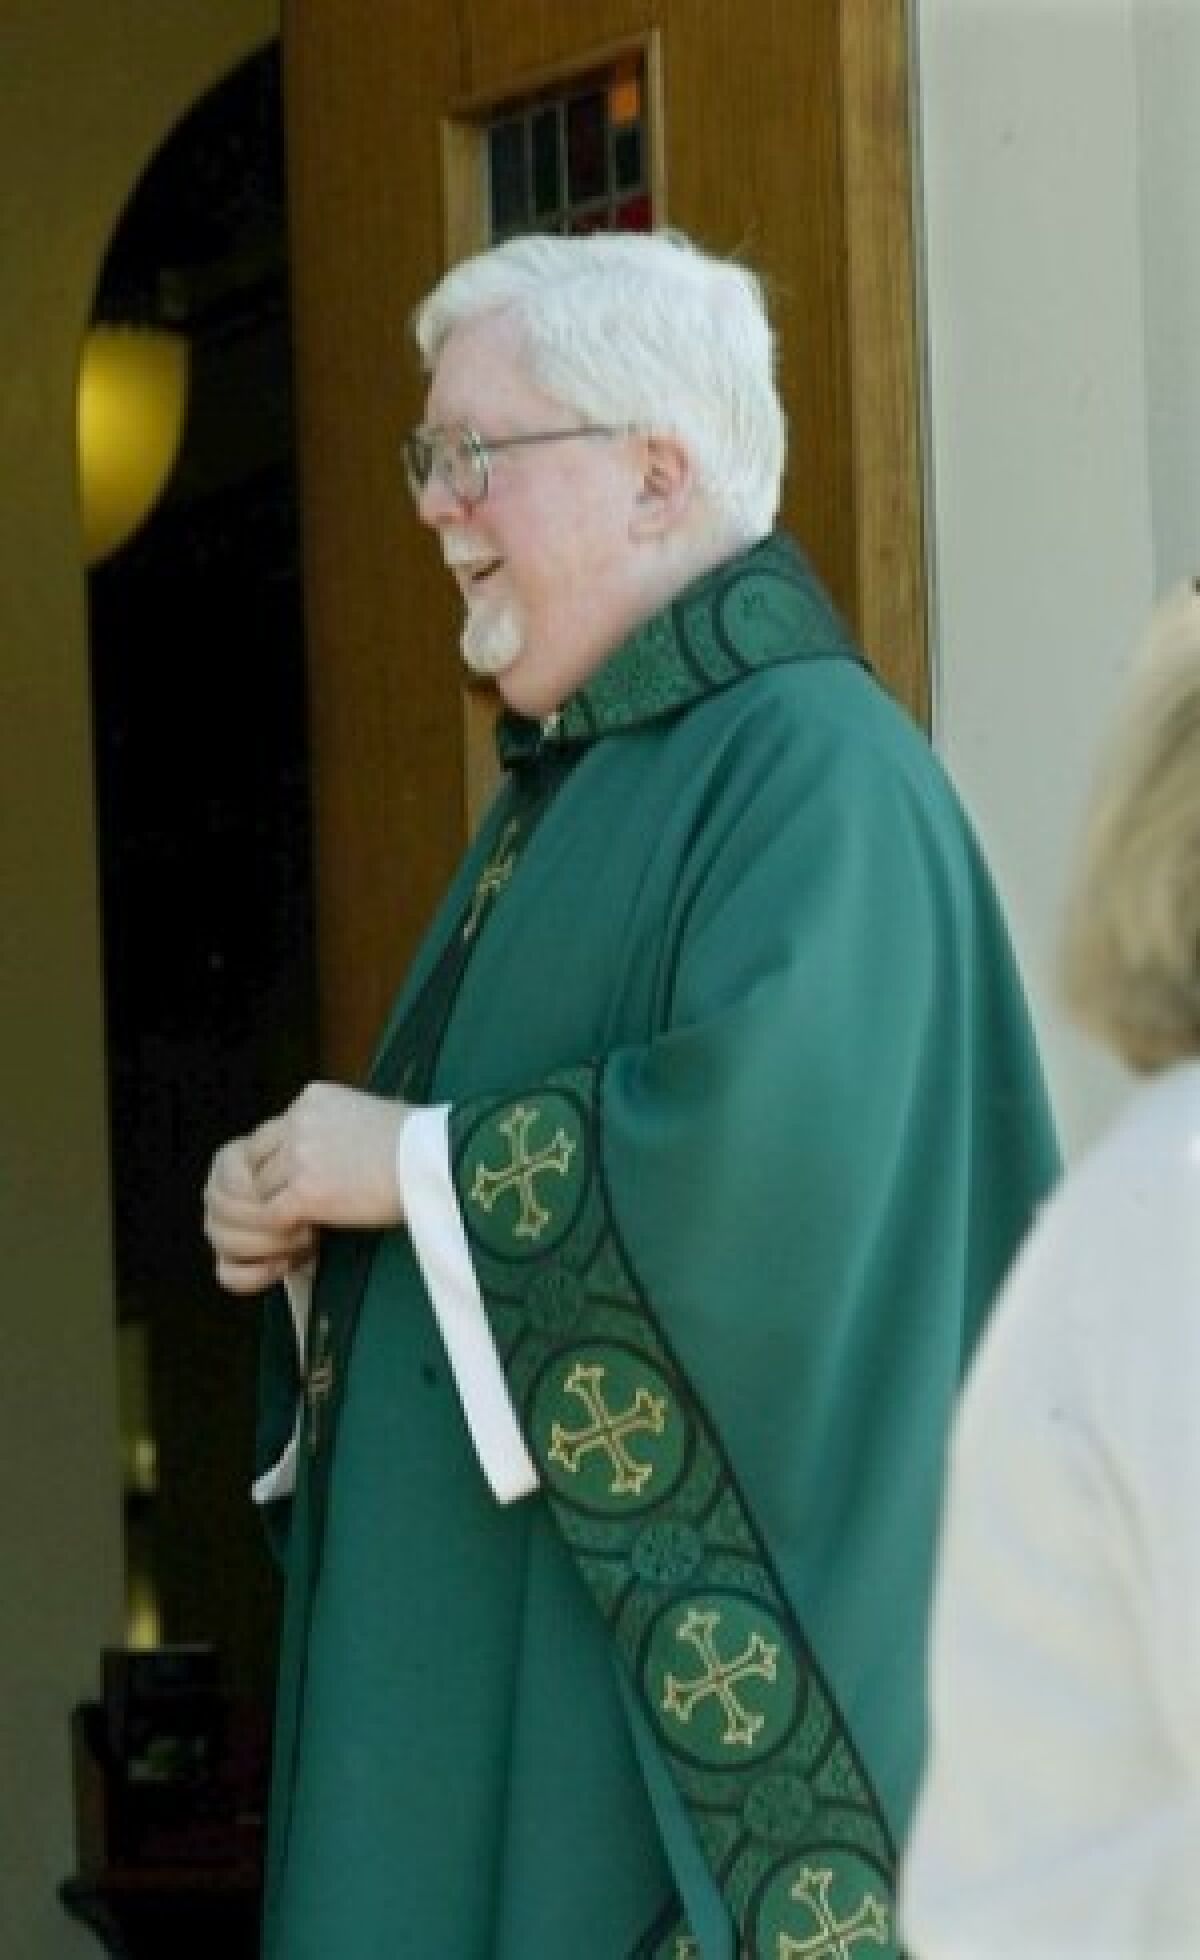 Testimony by Msgr. Richard Loomis (pictured) suggests there may be a paper trail showing Cardinal Roger Mahony was told about sex abuse.